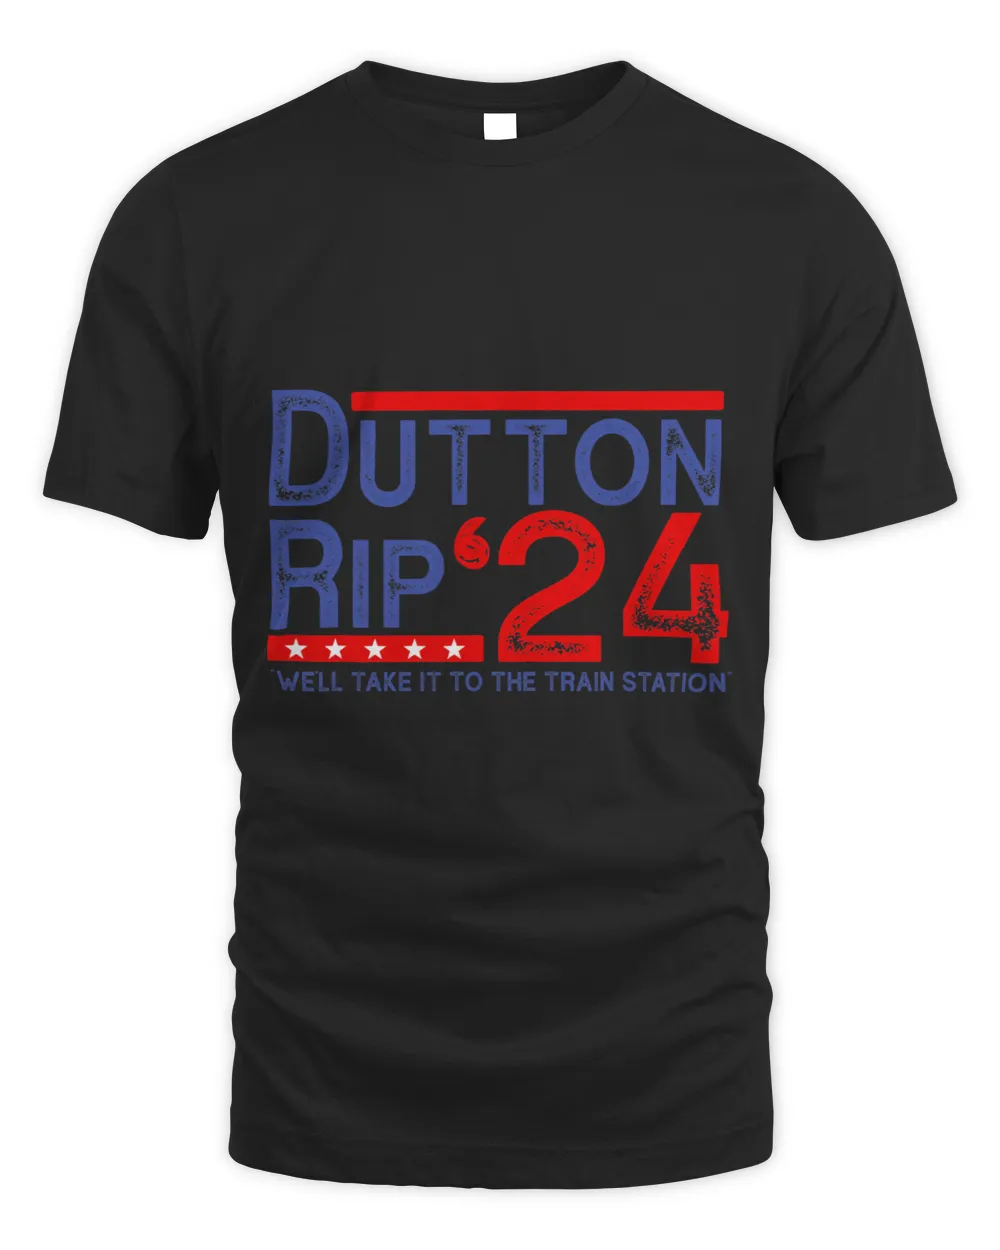 We’ll Take It To The Train Station Dutton Rip 24